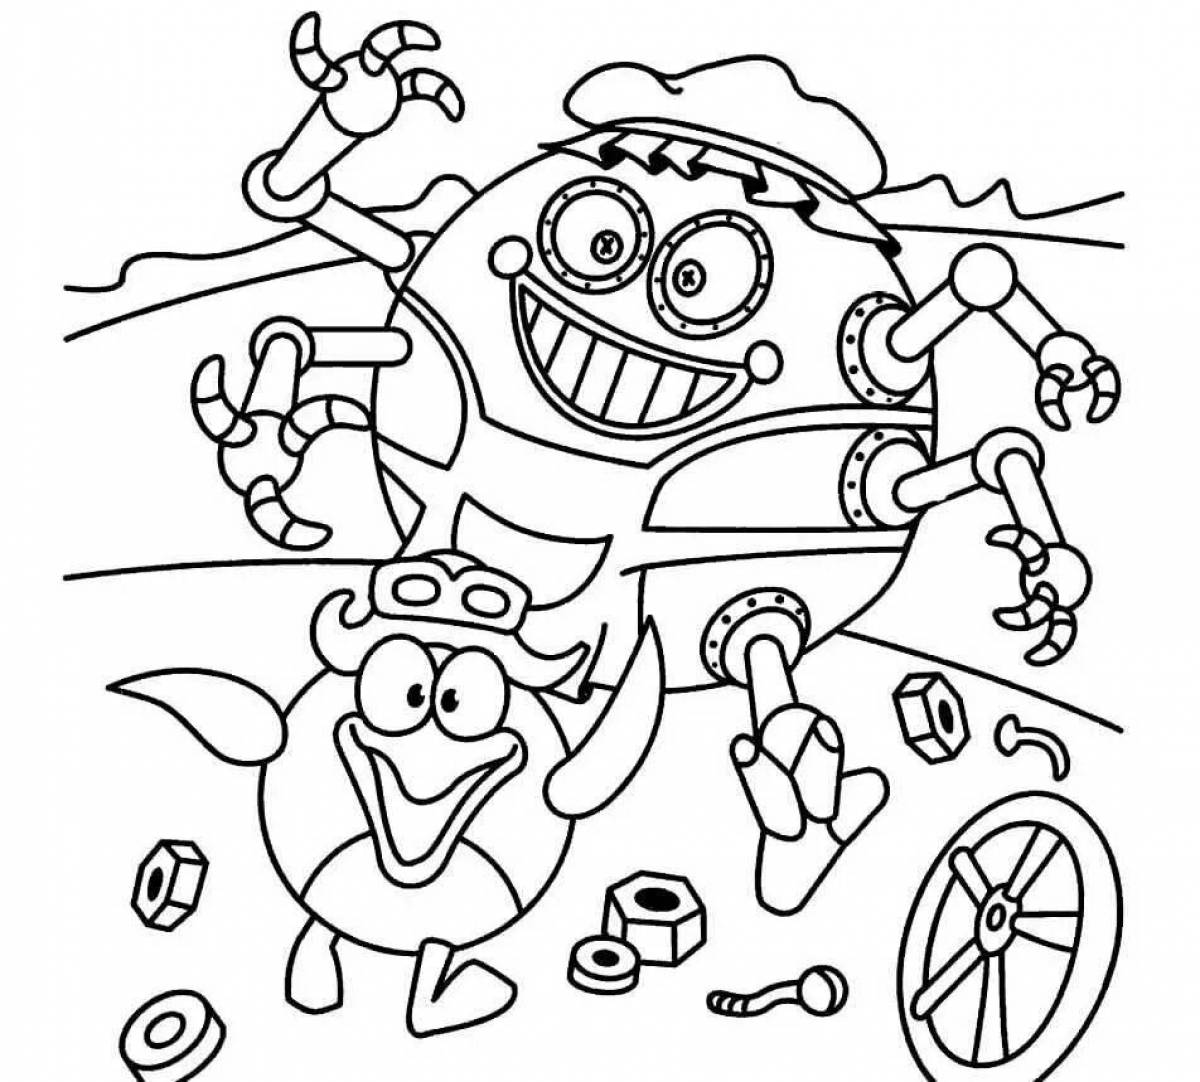 Delightful smeshariki coloring pages